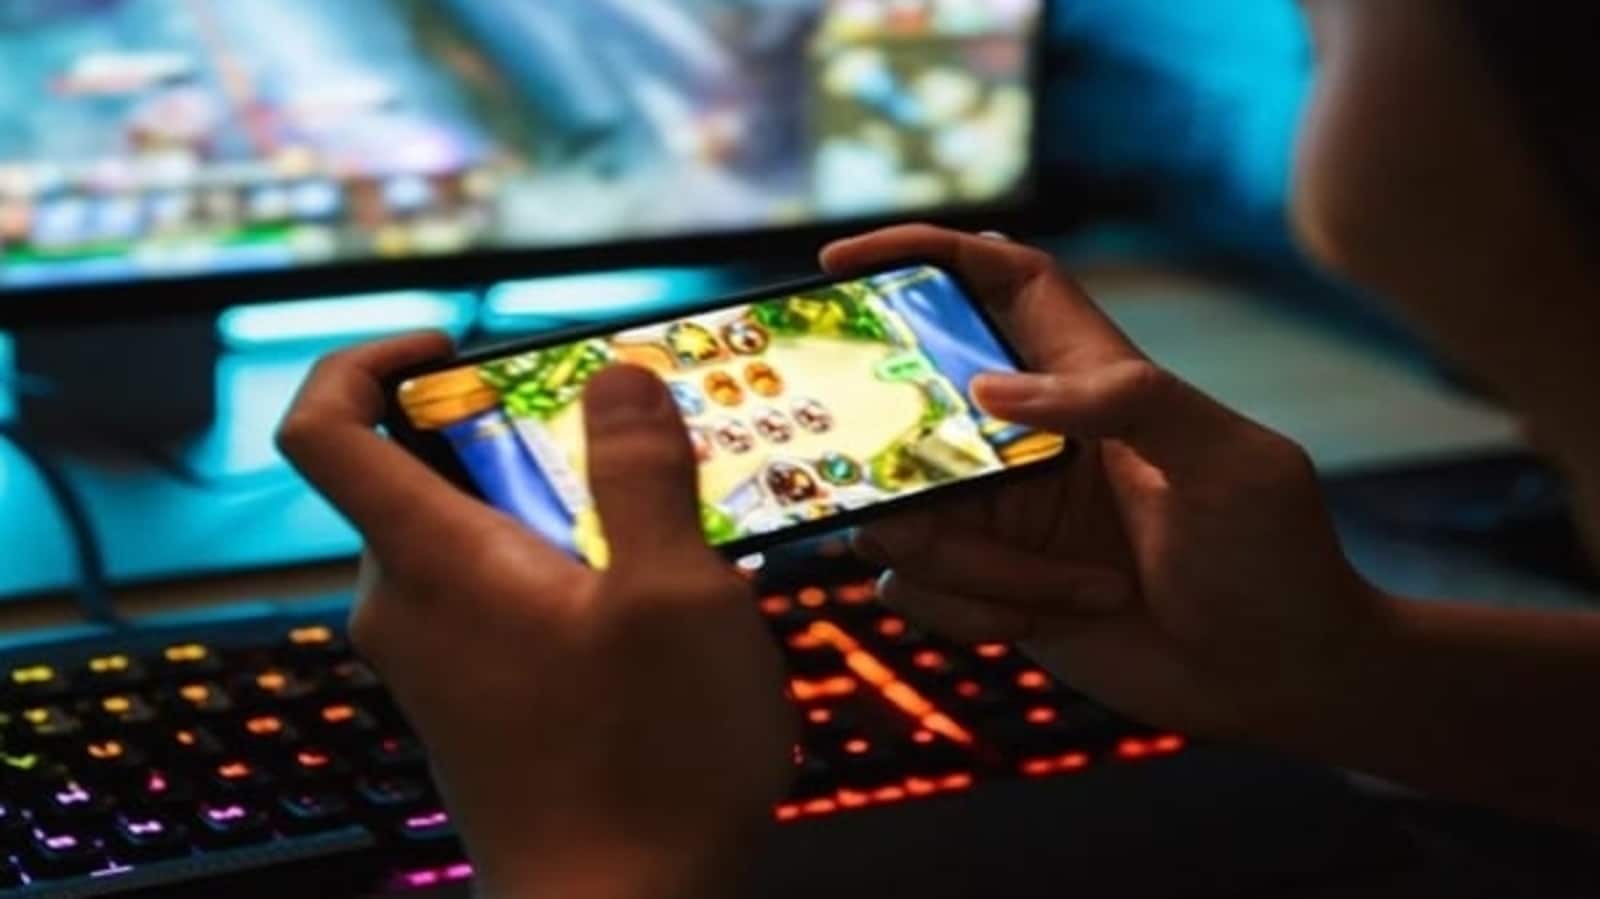 ‘We will ban 3 types of games in India’: Union Minister Rajeev Chandrasekhar on online gaming